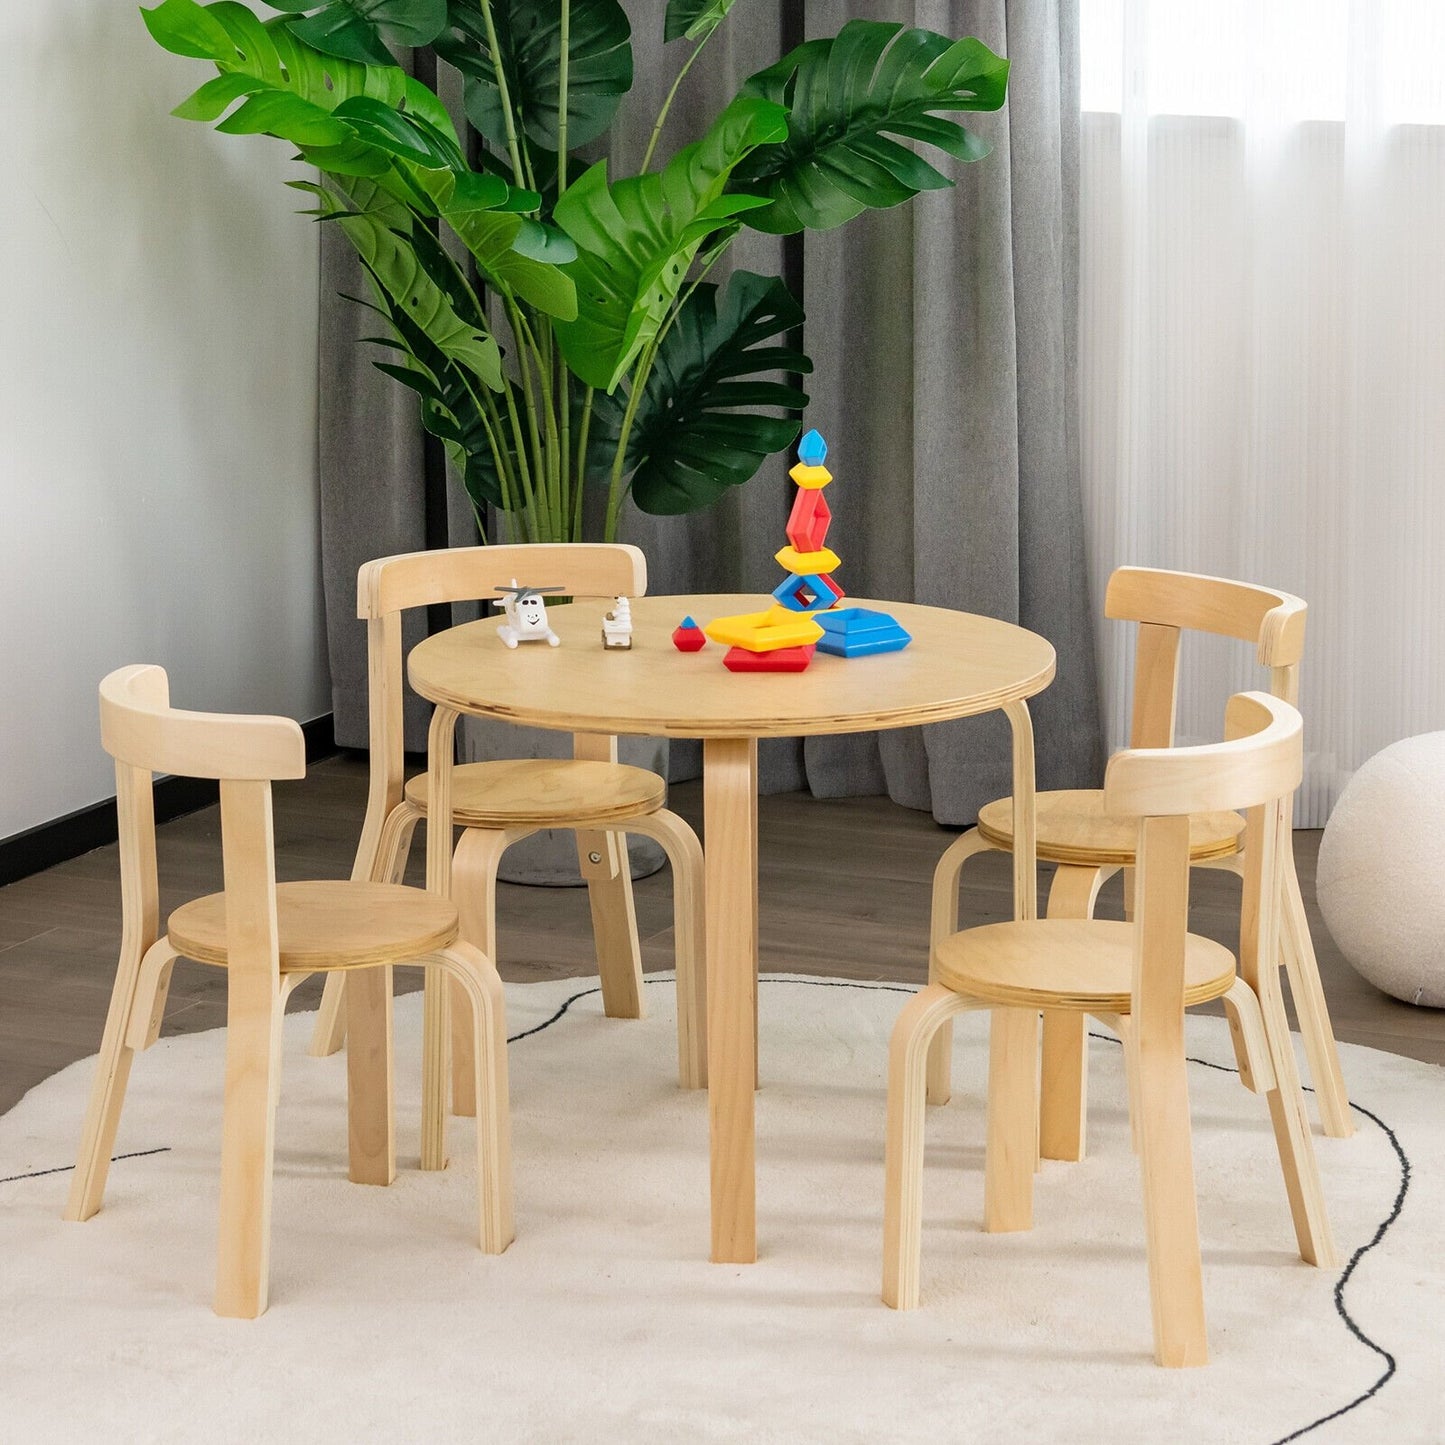 5-Piece Kids Wooden Curved Back Activity Table and Chair Set with Toy Bricks, Natural